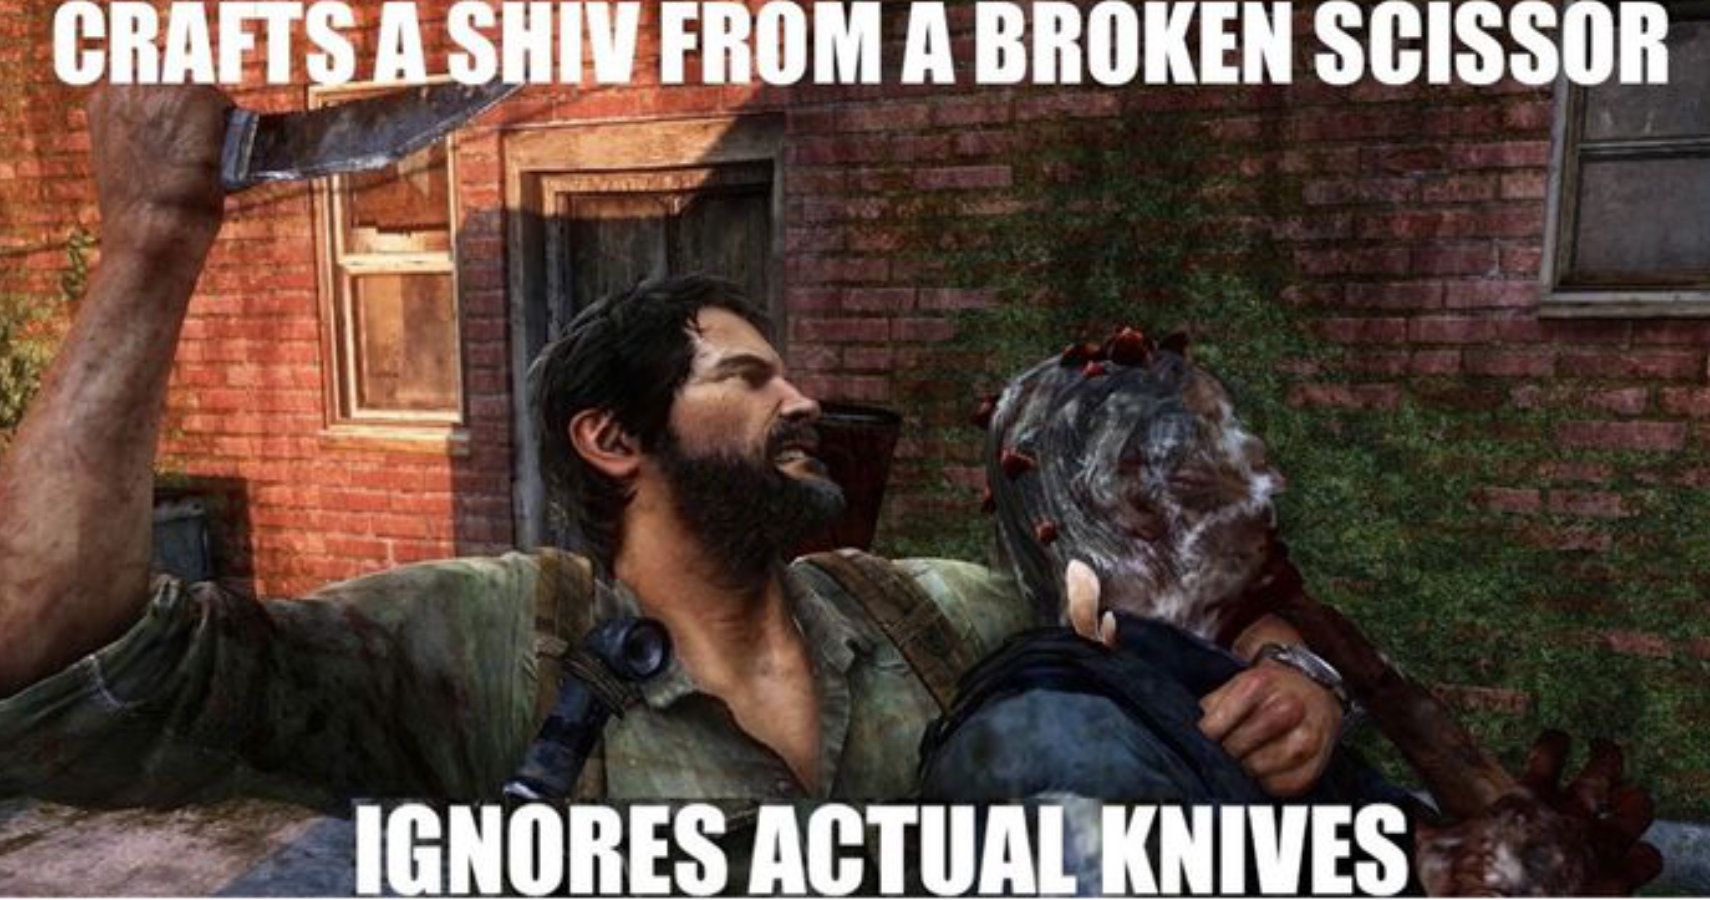 The Last of Us image with the text "creates a shiv from a broken scissor, ignores actual knives."